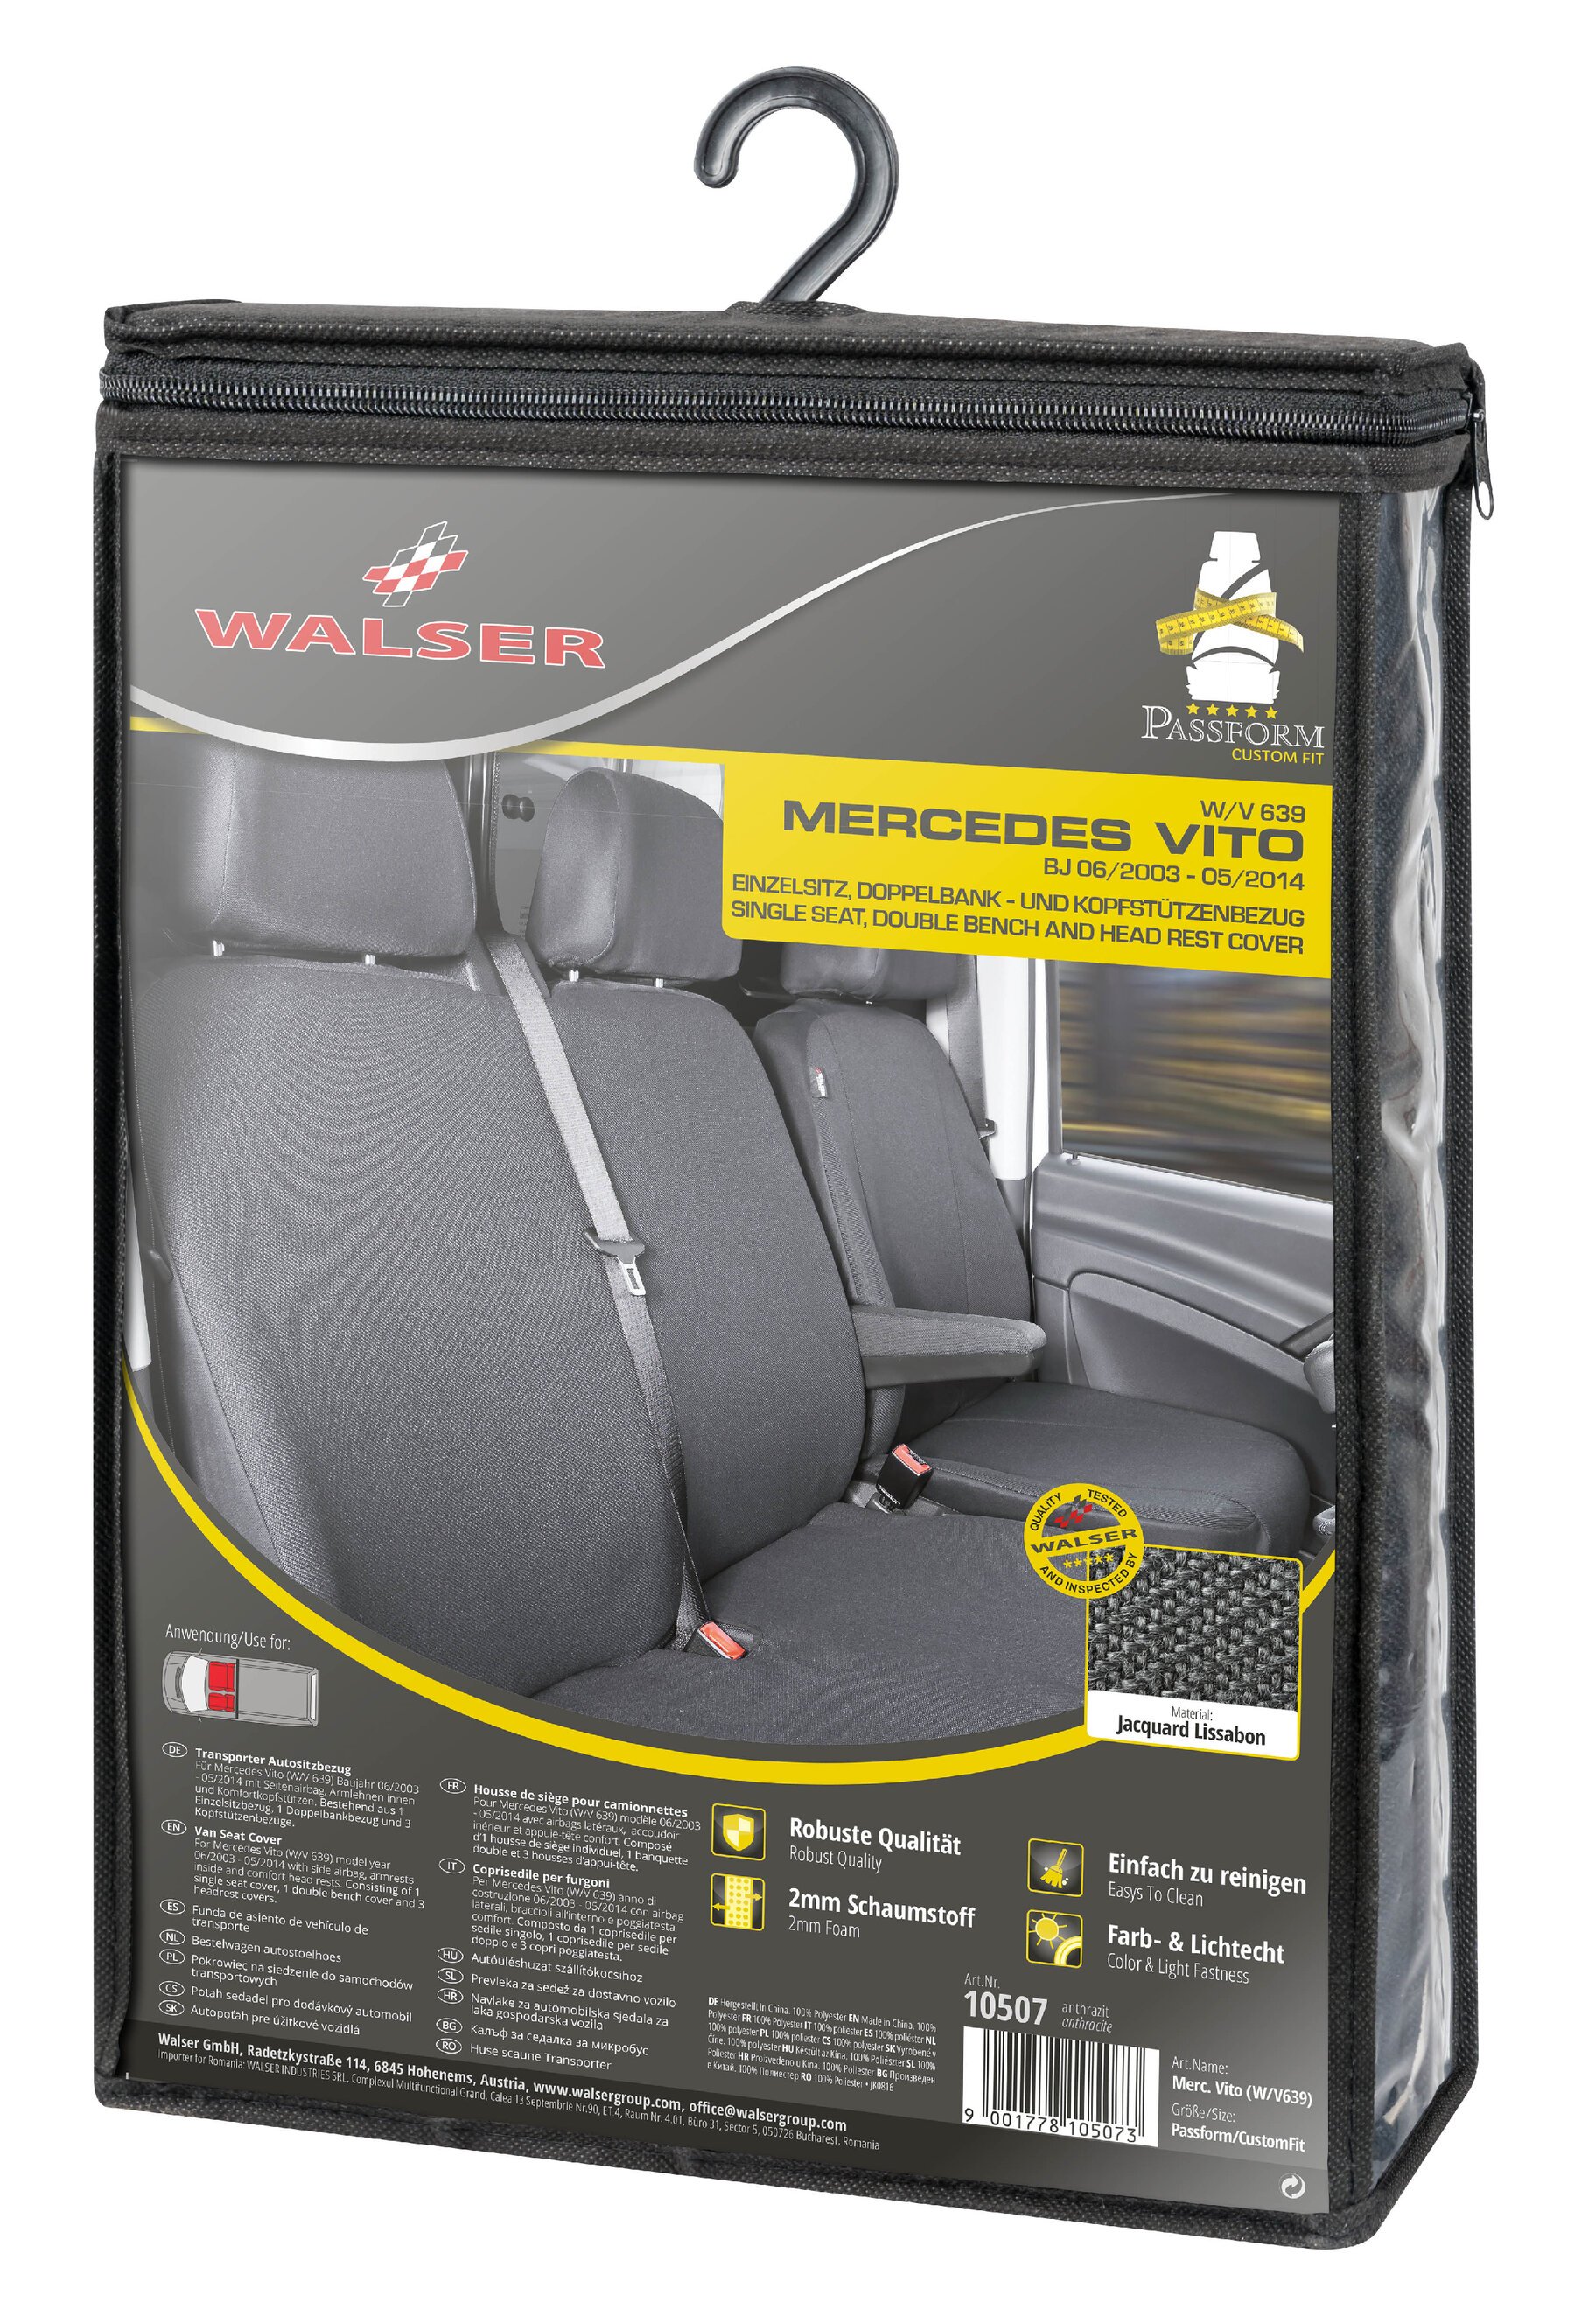 Seat cover made of fabric for Mercedes Vito/Viano, single seat cover front